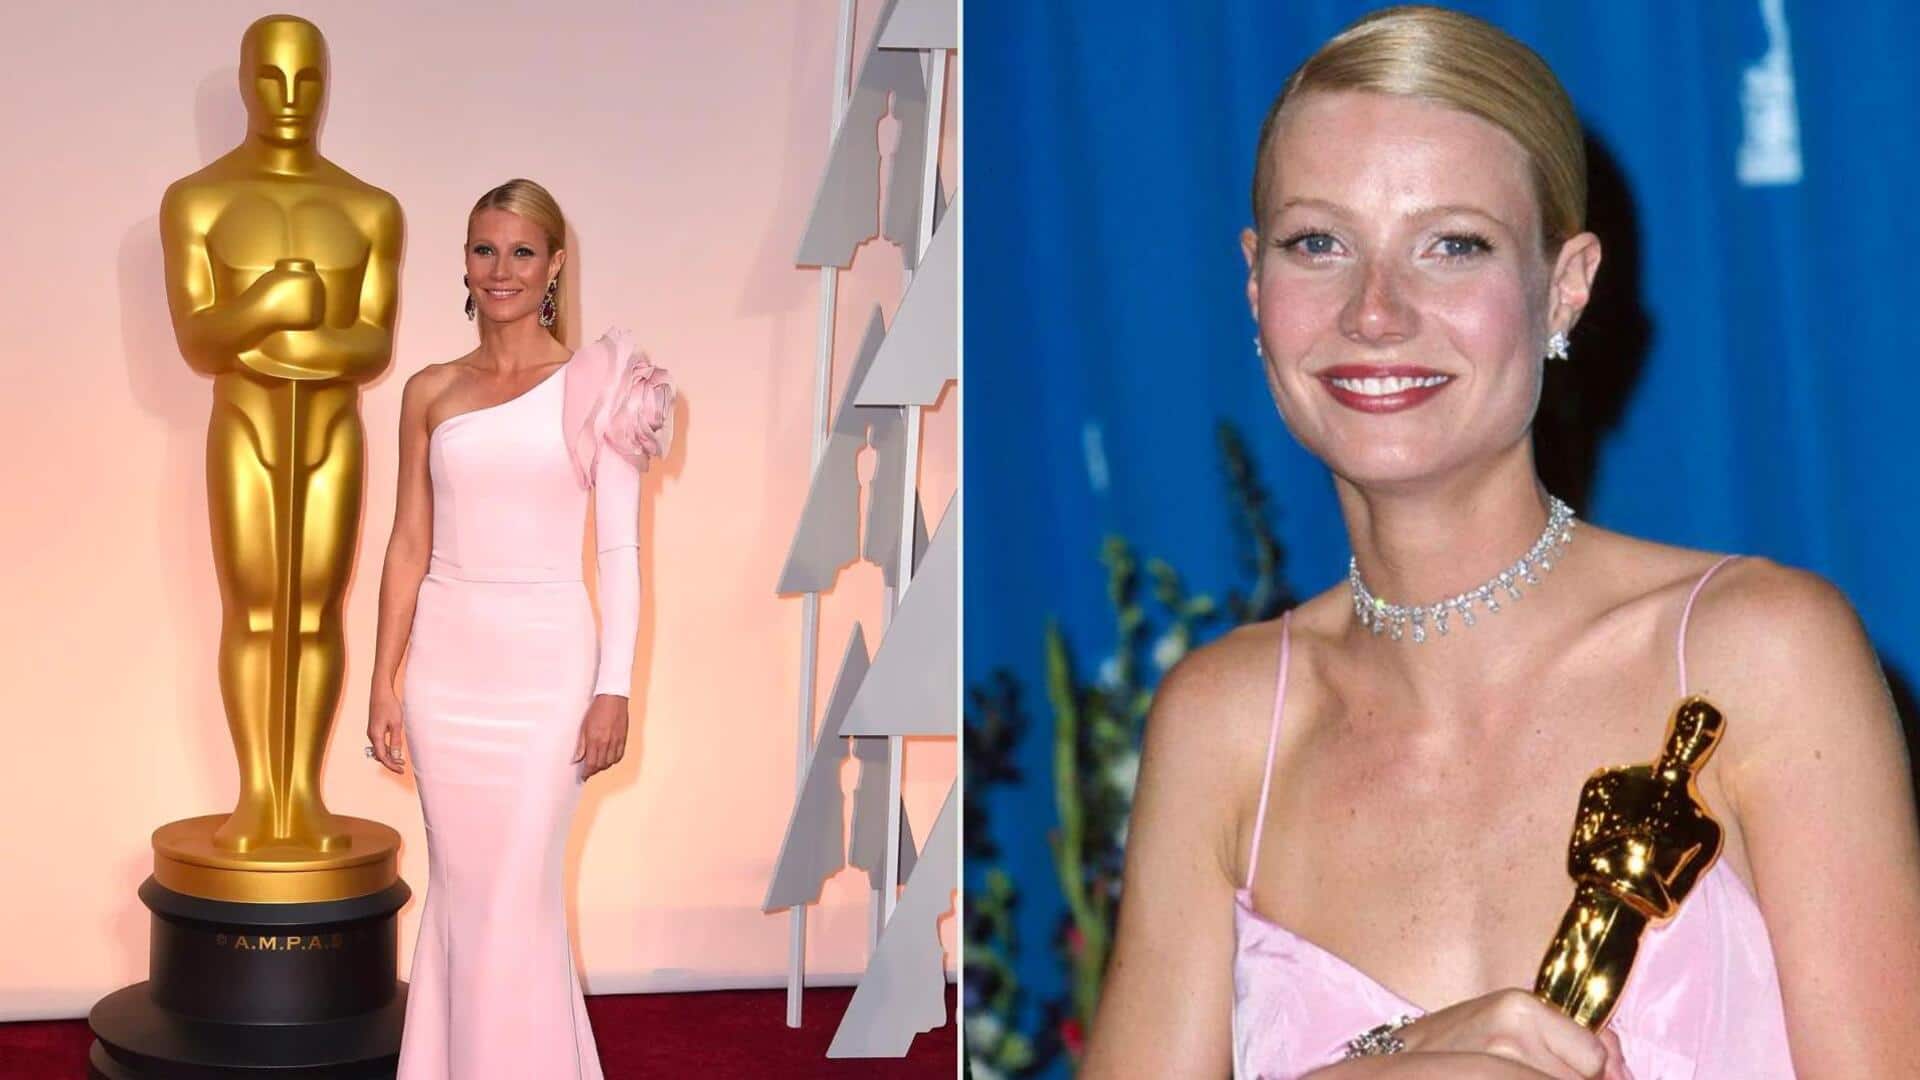 No, Gwyneth Paltrow doesn't use her Oscar as a doorstop